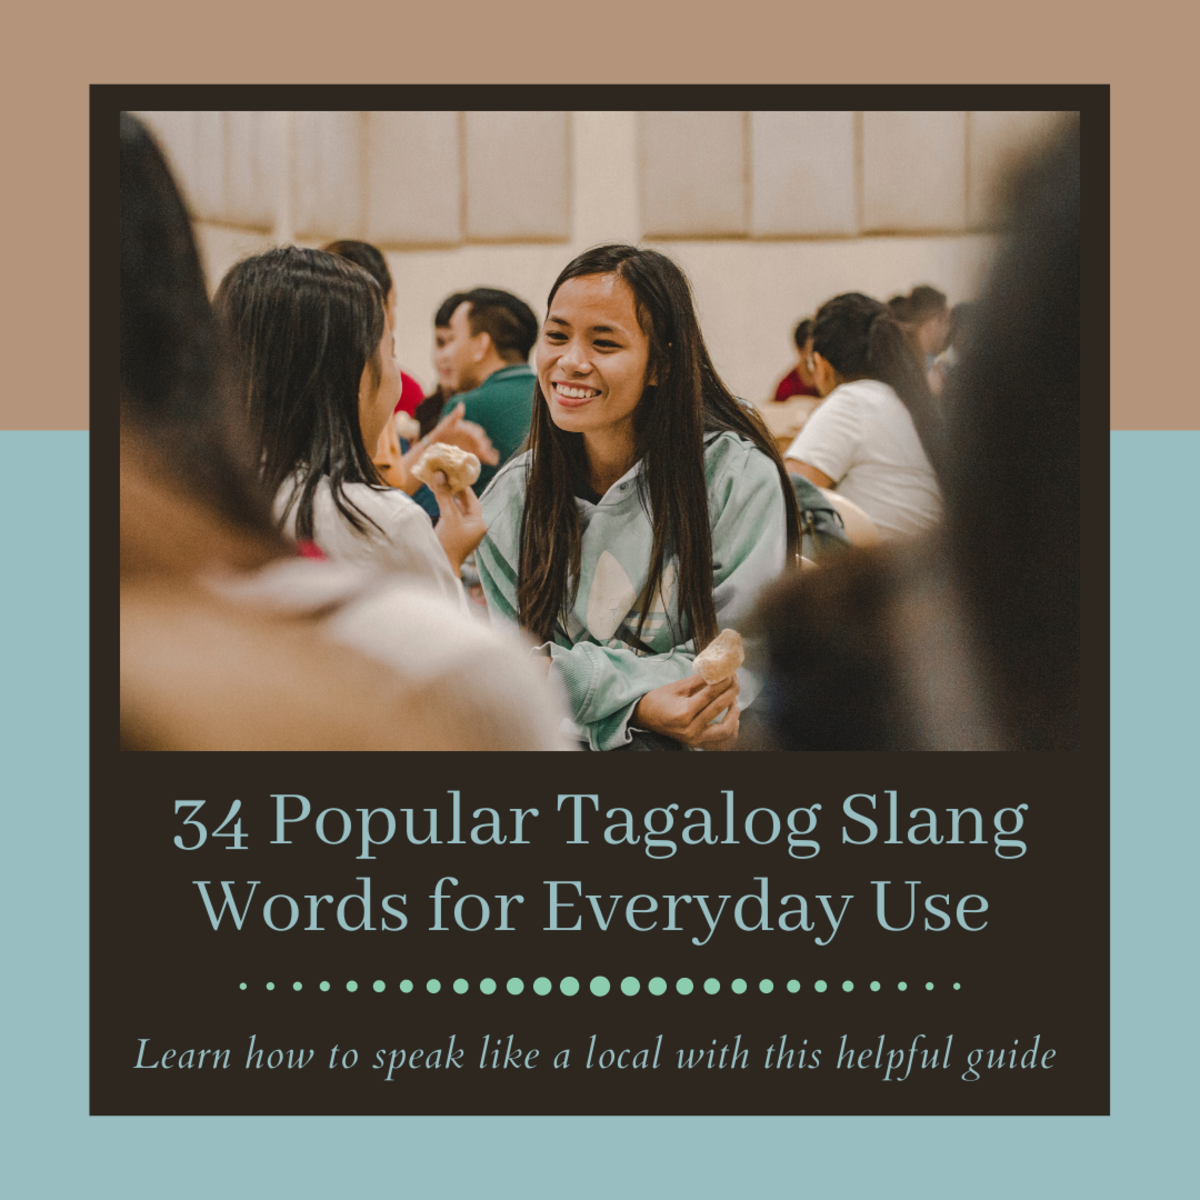 34 Tagalog Slang Words for Everyday Use